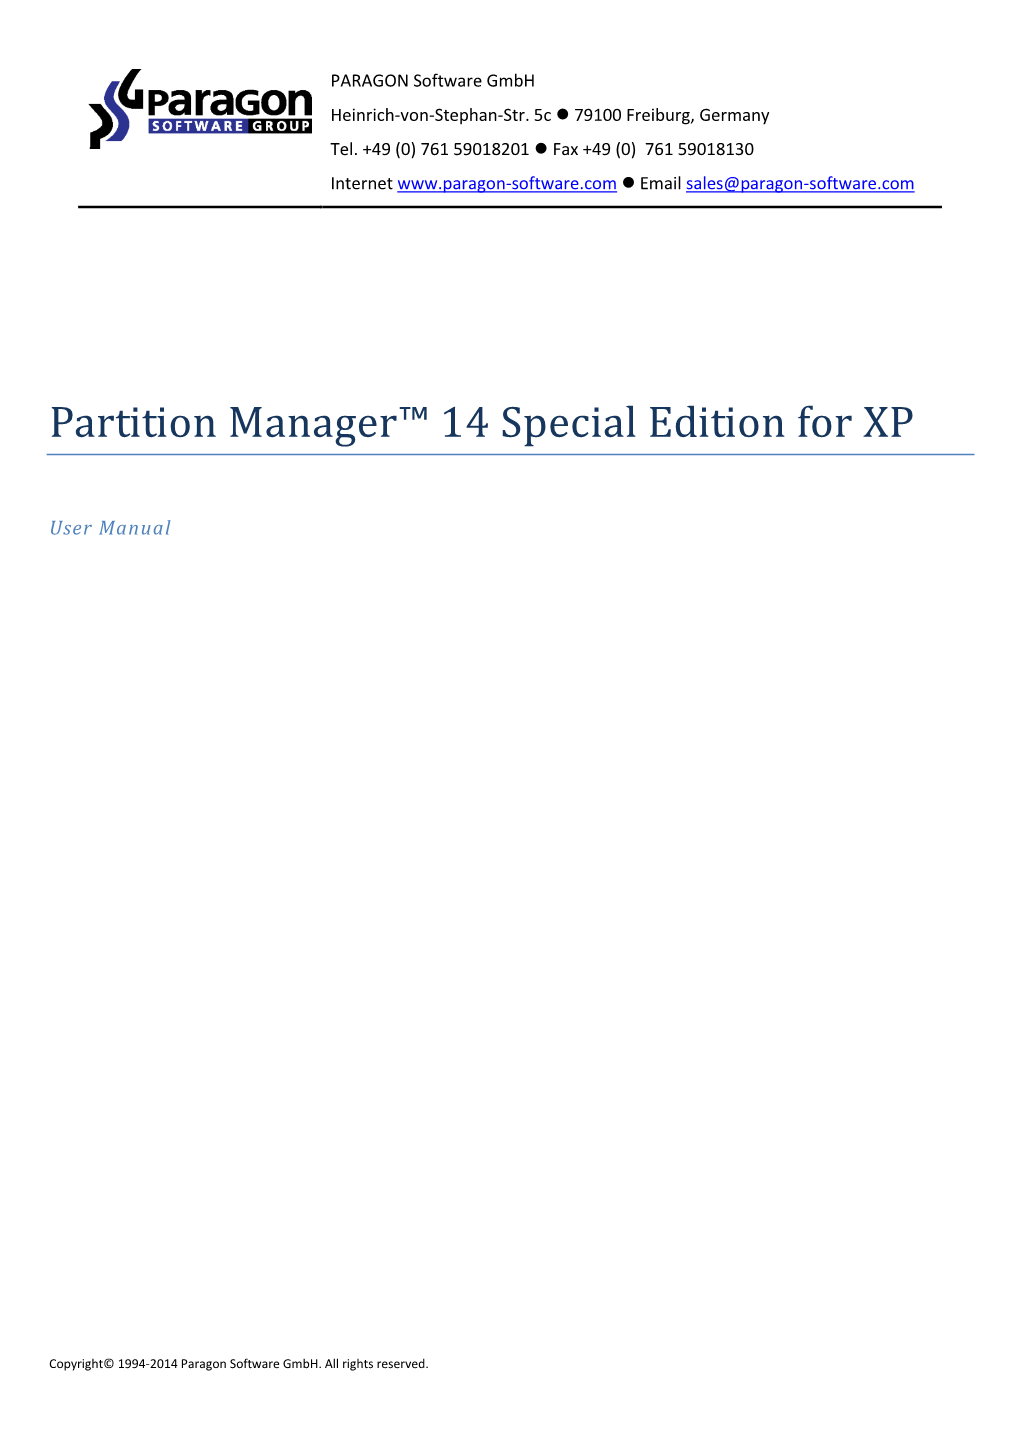 Partition Manager™ 14 Special Edition for XP